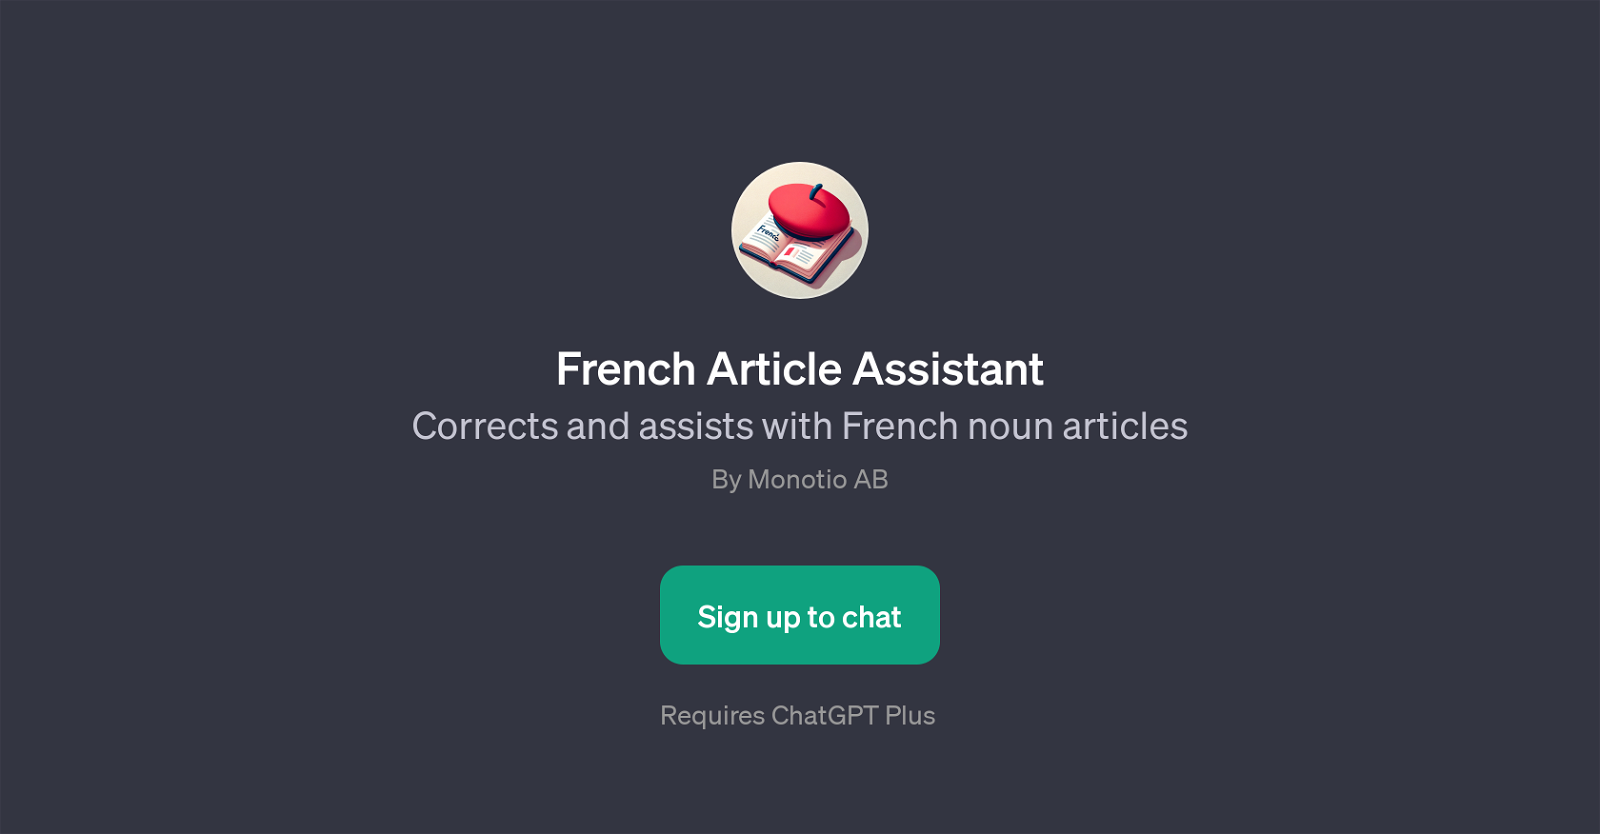 French Article Assistant website